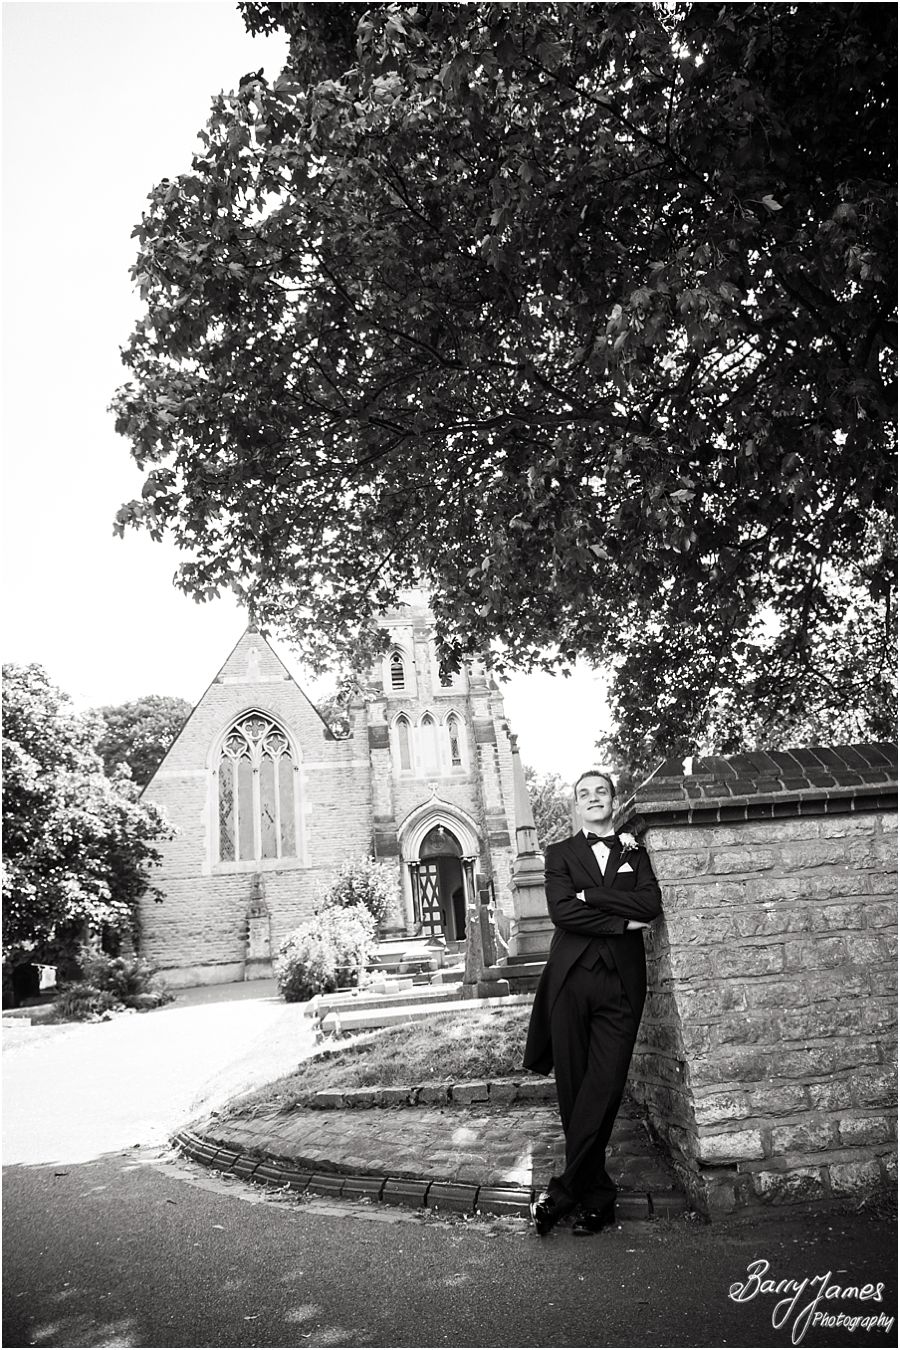 Wedding photography that tells the story of the beautiful ceremony at Rushall Parish Church in Walsall by Professional Wedding Photographer Barry James